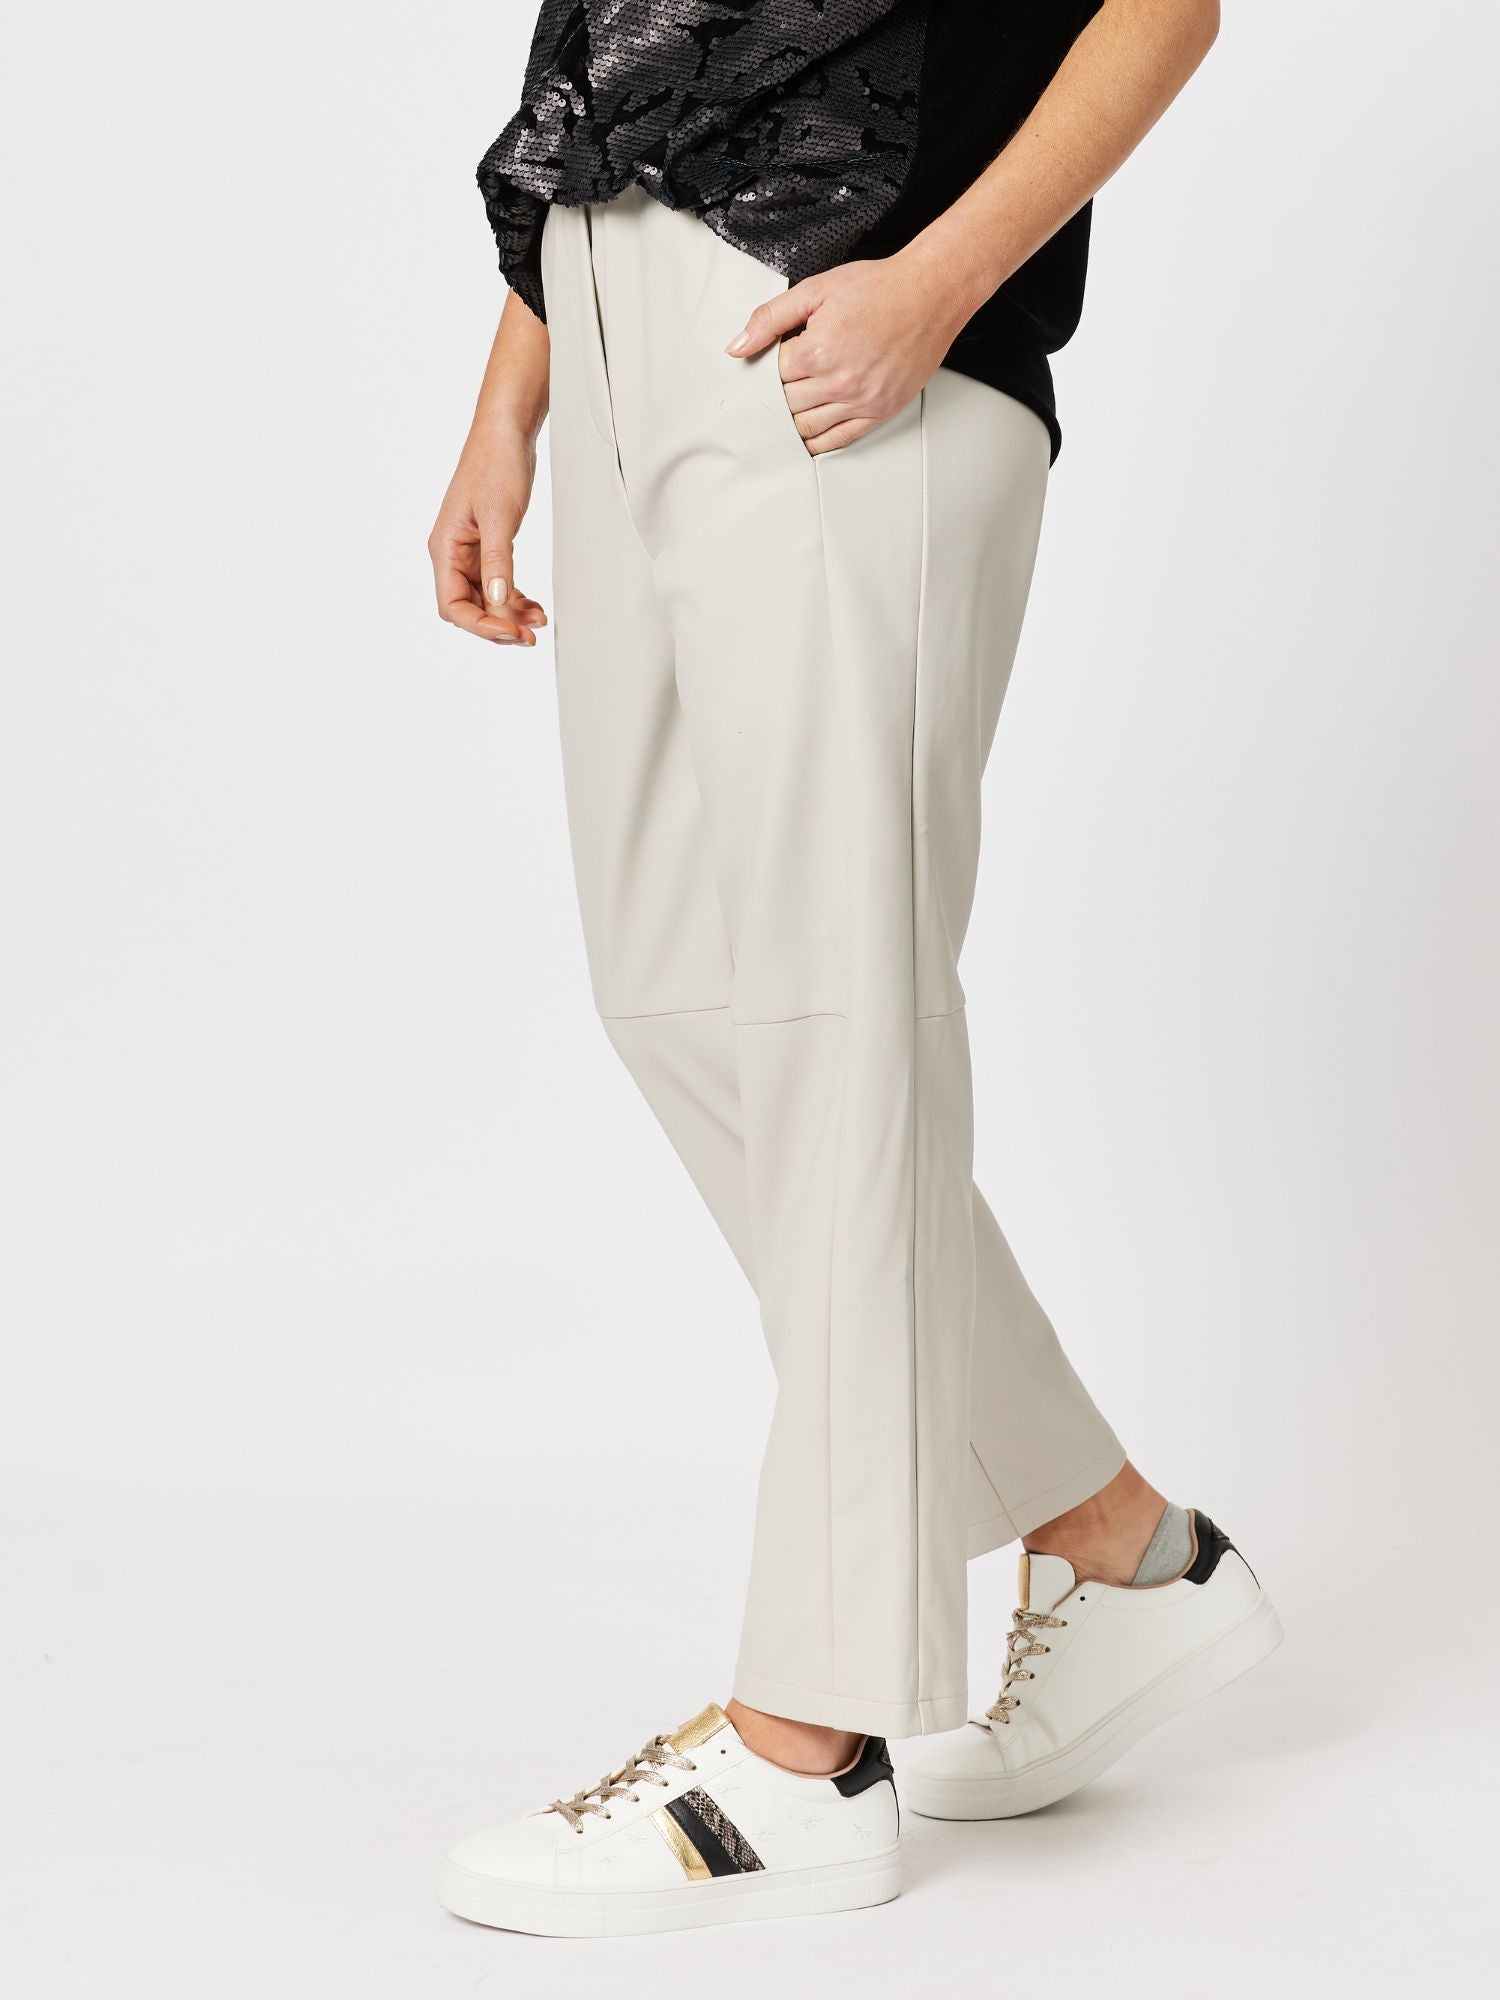 Vegan Leather Pull On Pant - Putty